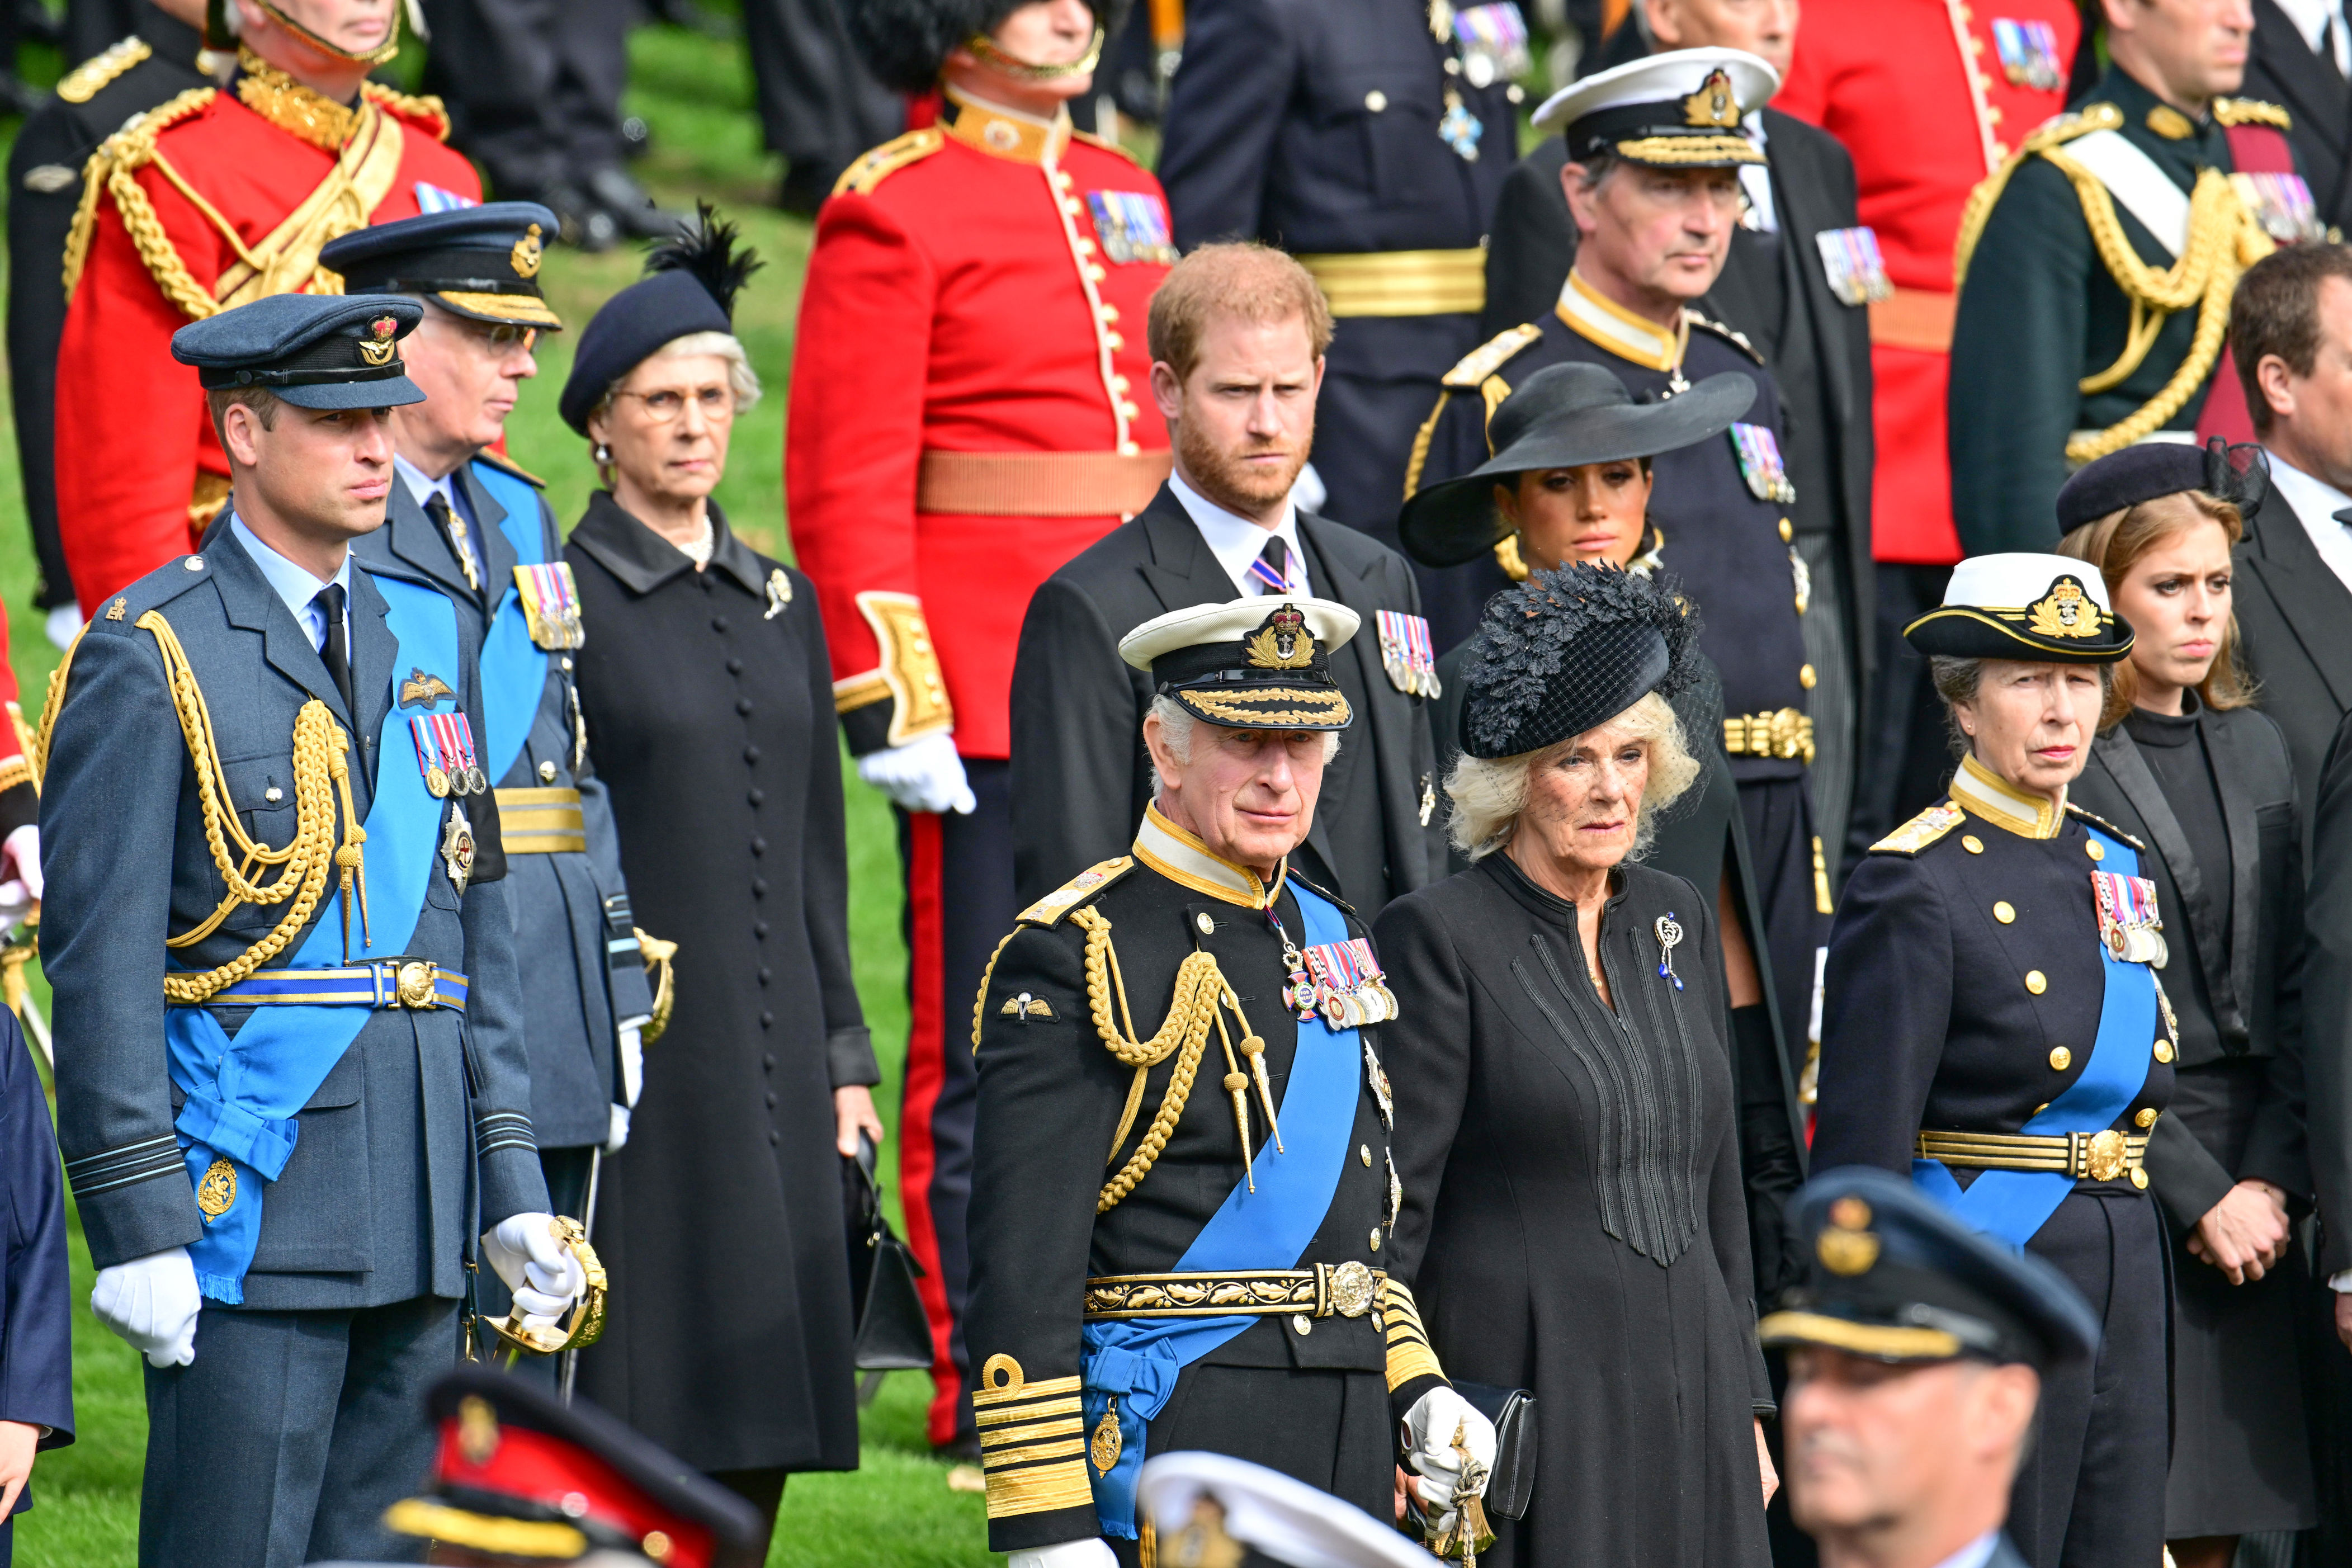 <p>Prince William, Prince Harry, Duchess Meghan, King Charles III, Camilla, Queen Consort, Princess Anne, Princess Beatrice and more royals observed the coffin of Queen Elizabeth II as it was transferred from the gun carriage to the hearse at Wellington Arch following <a href="https://www.wonderwall.com/celebrity/royals/best-photos-from-queen-elizabeth-ii-funeral-king-charles-princes-william-prince-harry-george-charlotte-kate-meghan652347.gallery">her state funeral</a> at Westminster Abbey. The funeral cortege continued on to Windsor, England, for a committal ceremony and burial at St. George's Chapel at Windsor Castle, on Sept. 19, 2022.</p>